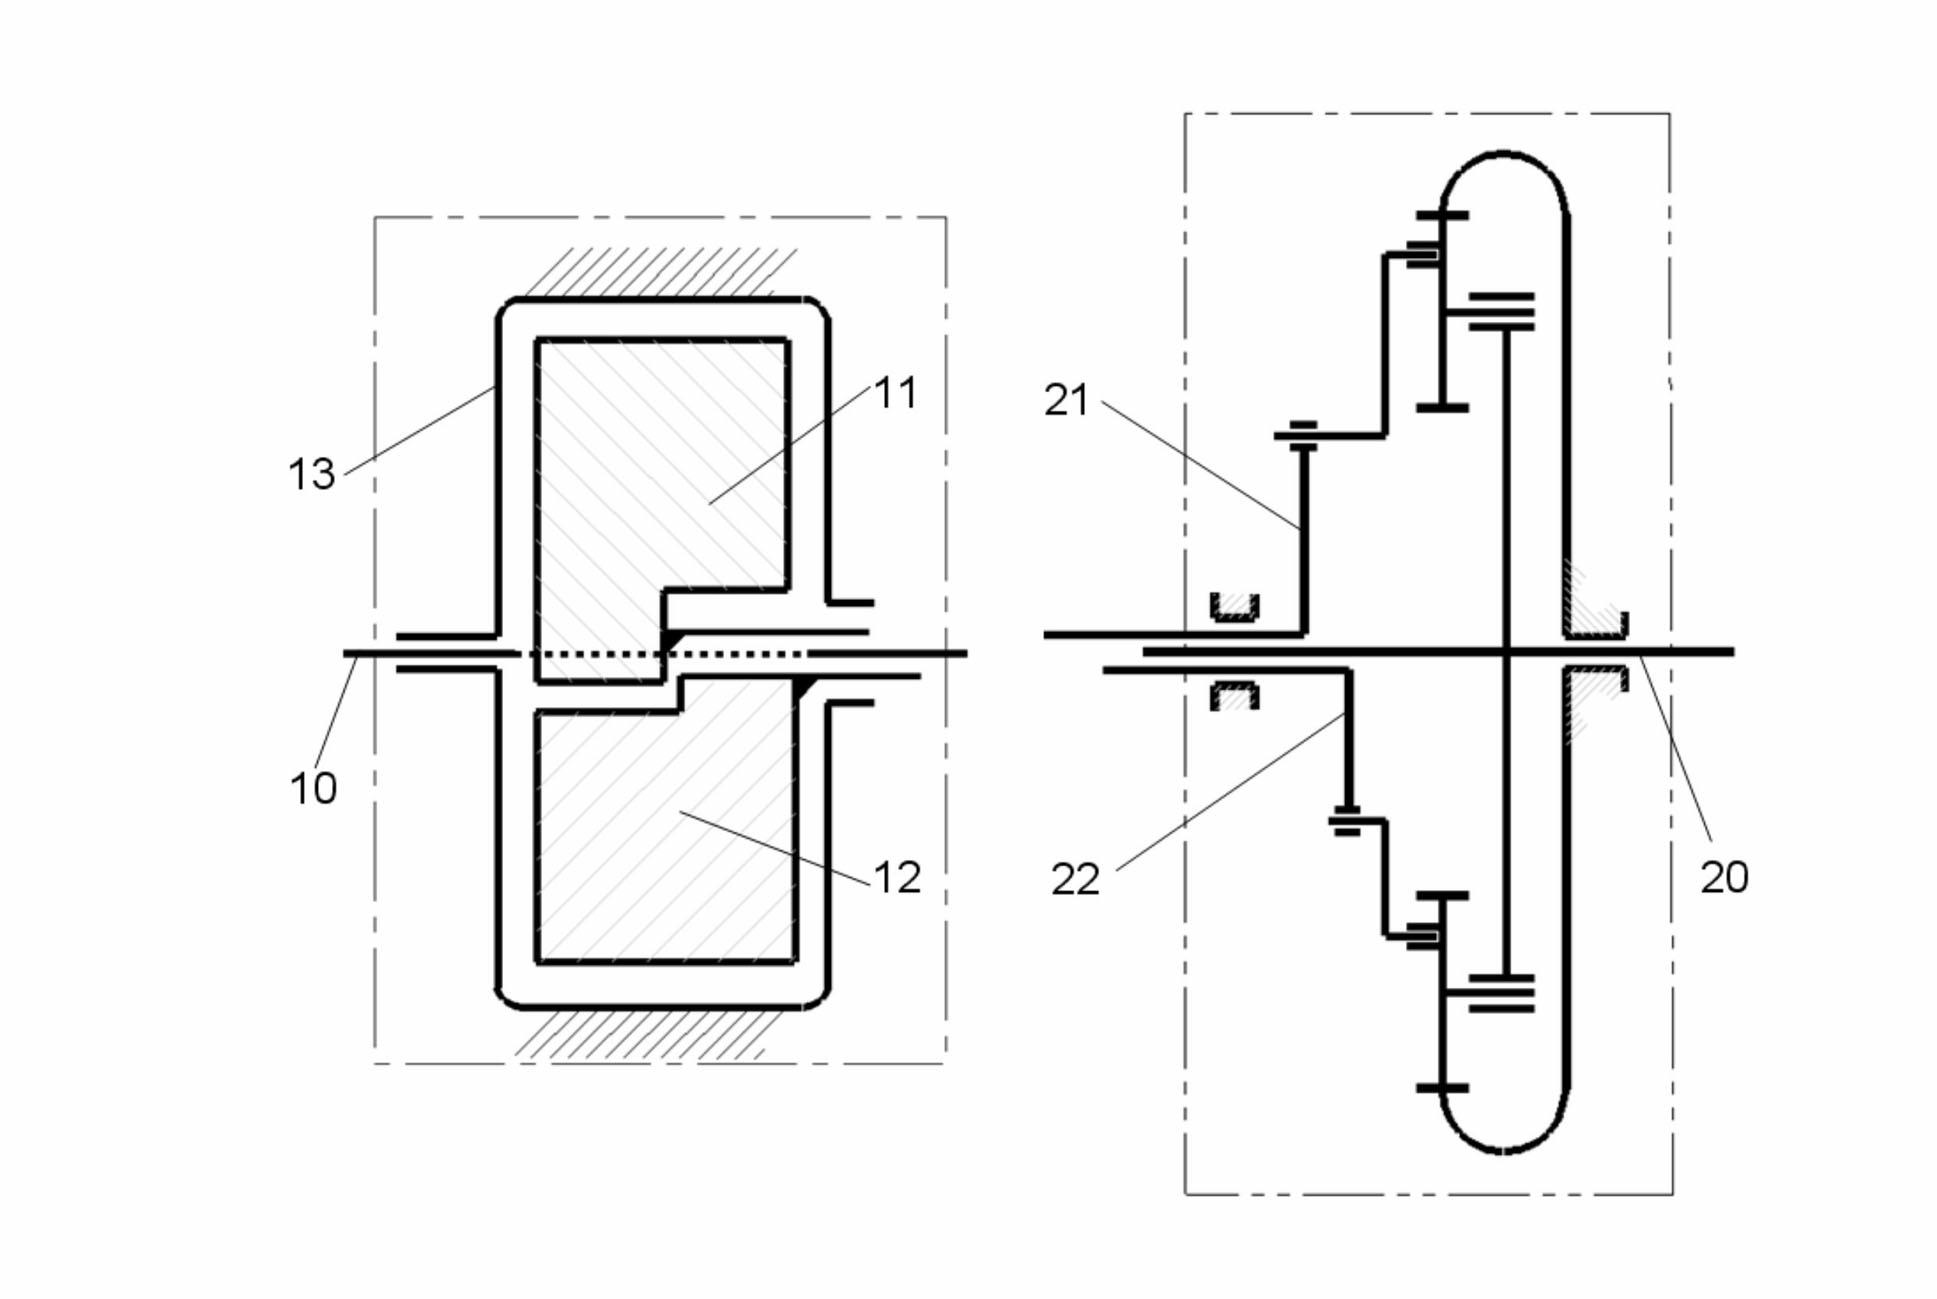 Method for eliminating torsion inertia force of double-rotor piston engine